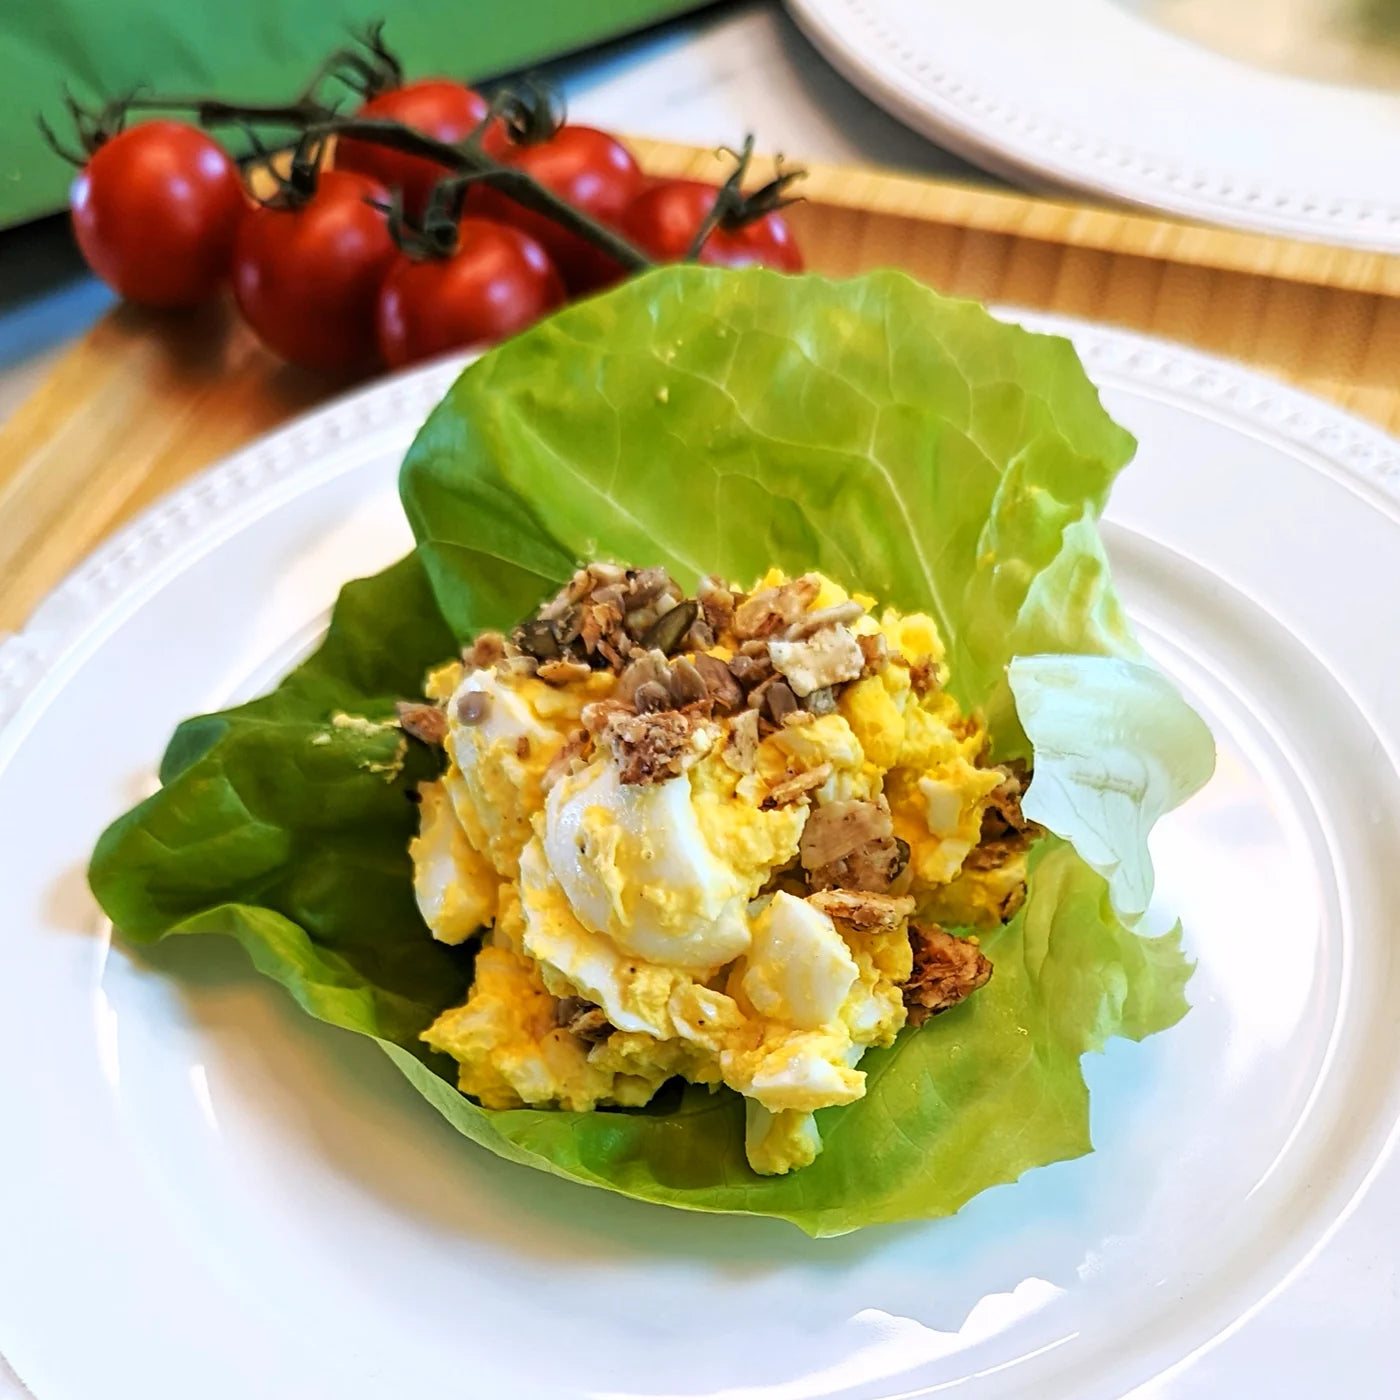 A crunchy lettuce wrap with rich egg salad topped with Struesli granola.